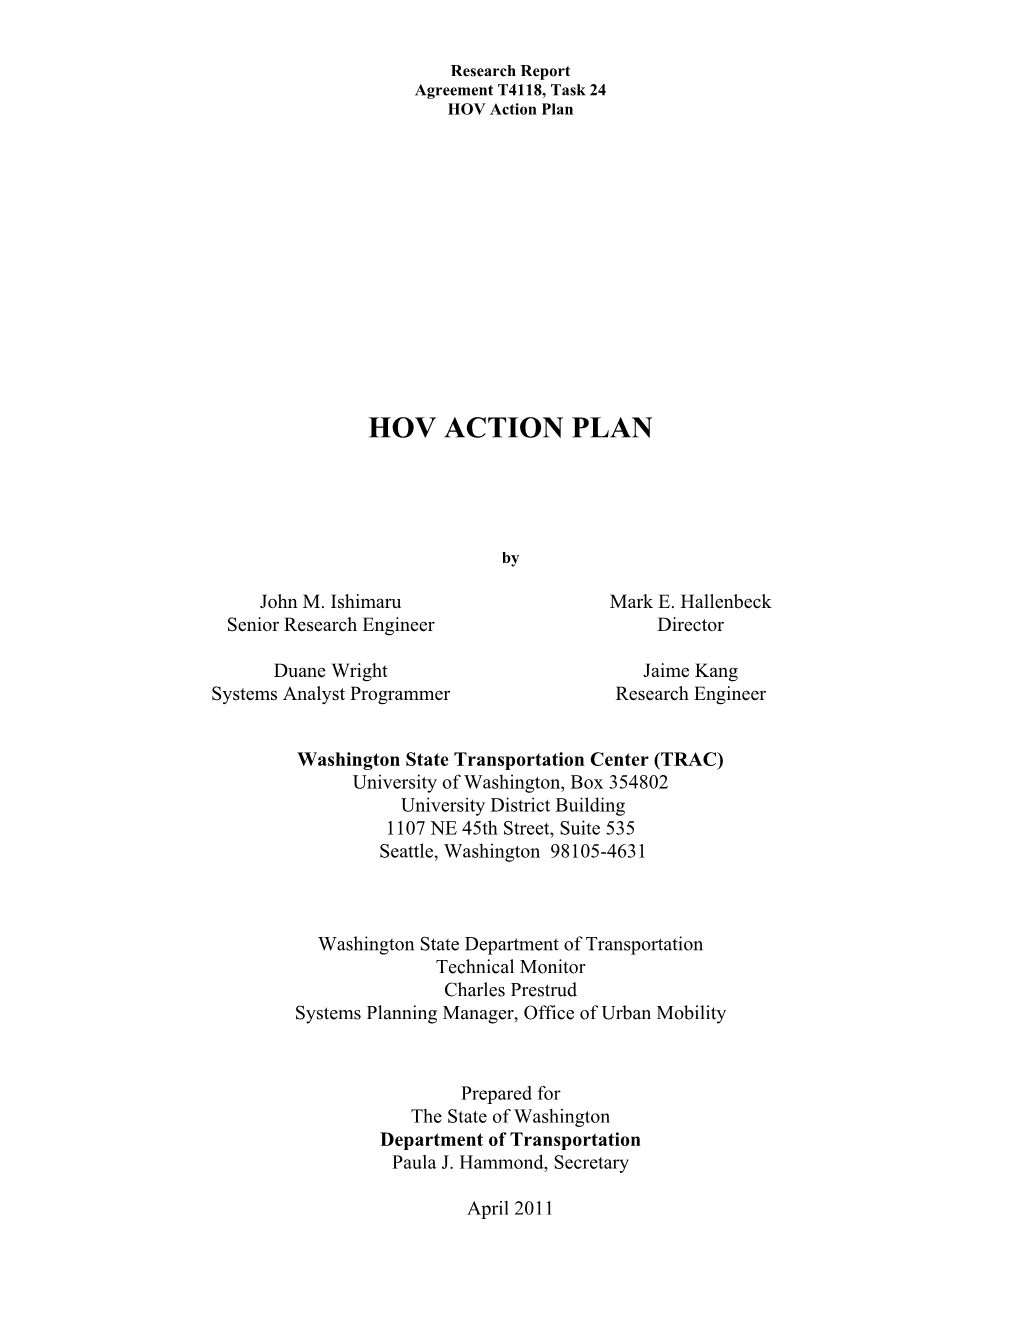 HOV Action Plan